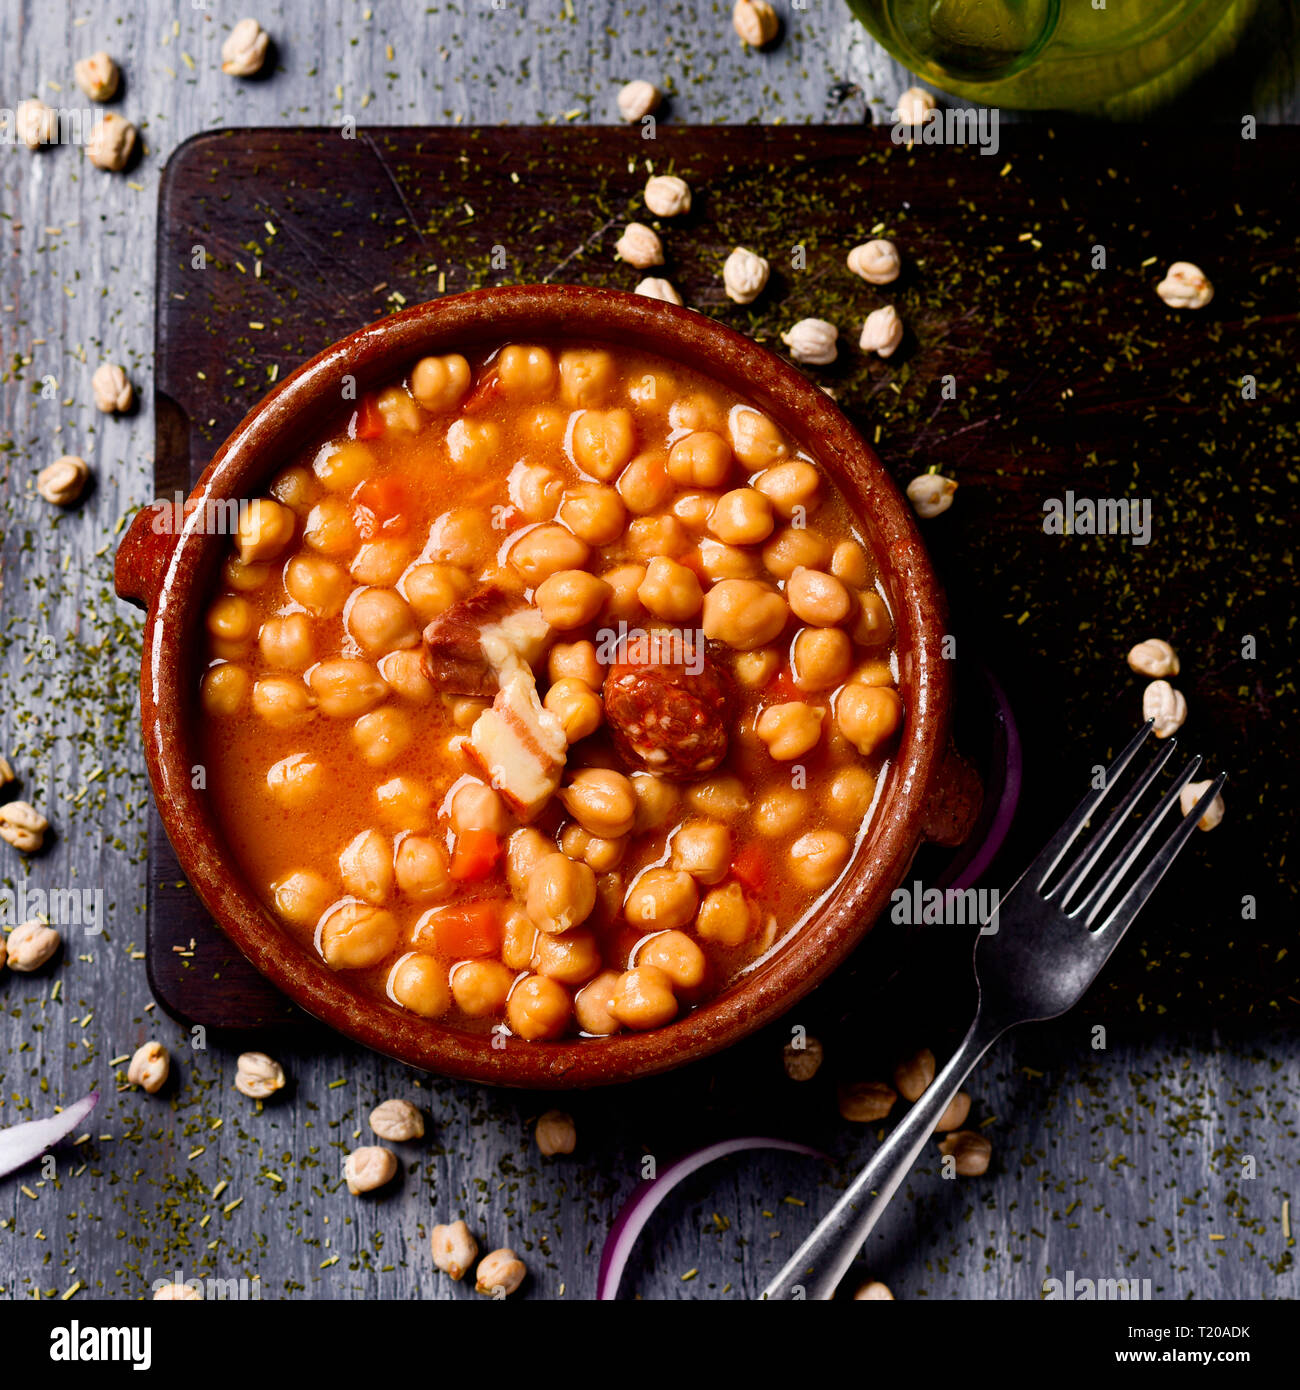 high angle view of an earthenware casserole with garbanzos a la riojana, a spanish chickpeas stew, on a wooden chopping board placed on a rustic woode Stock Photo